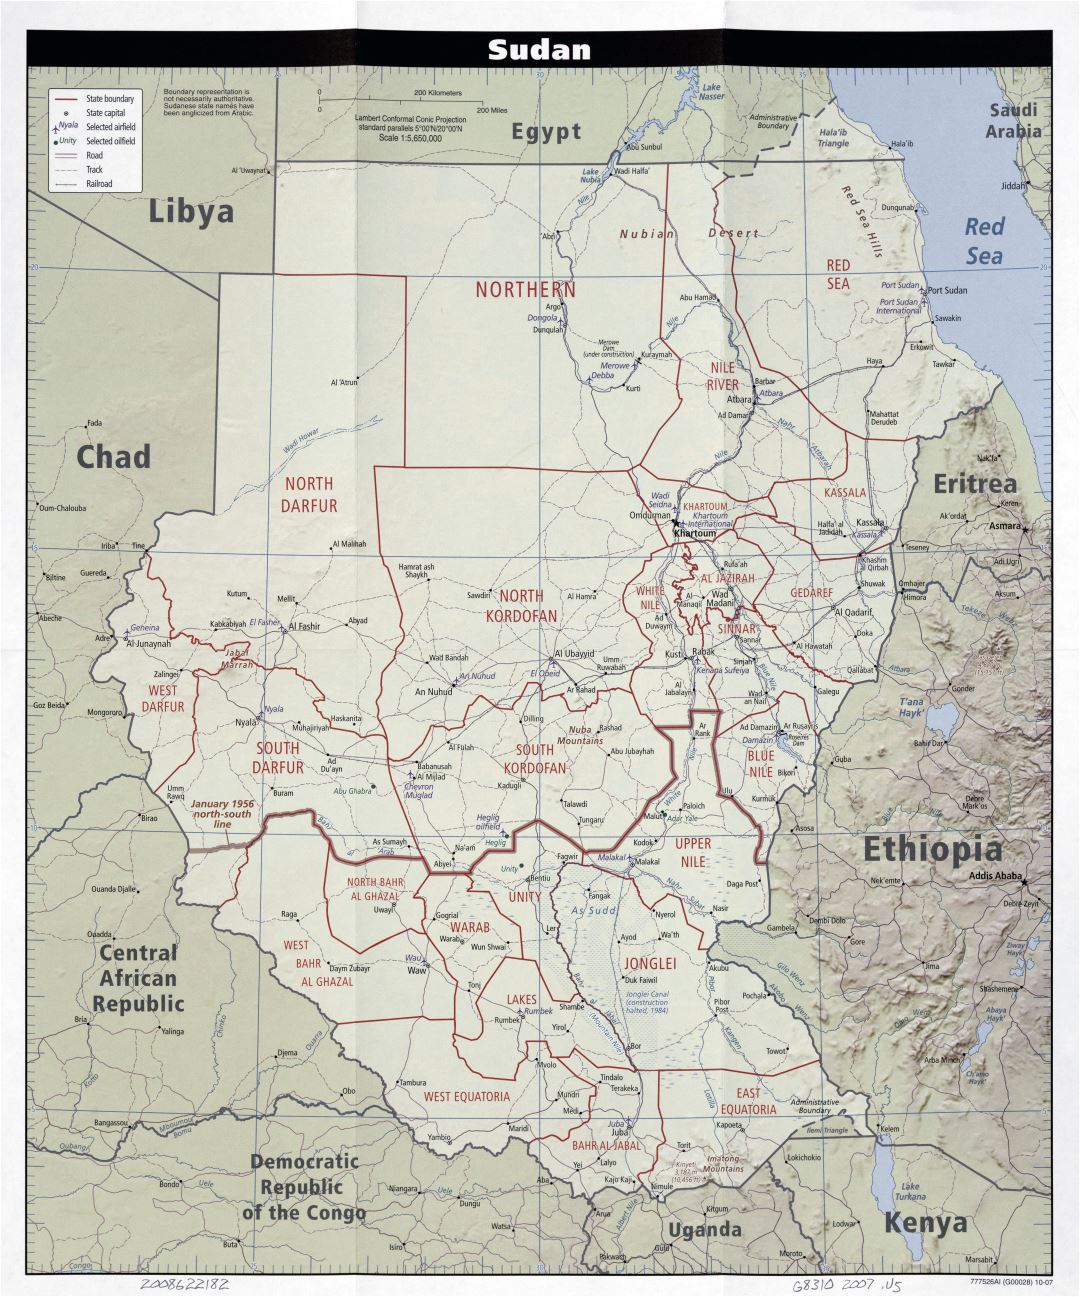 Large scale political and administrative map of Sudan with relief, roads, railroads, cities and airports - 2007